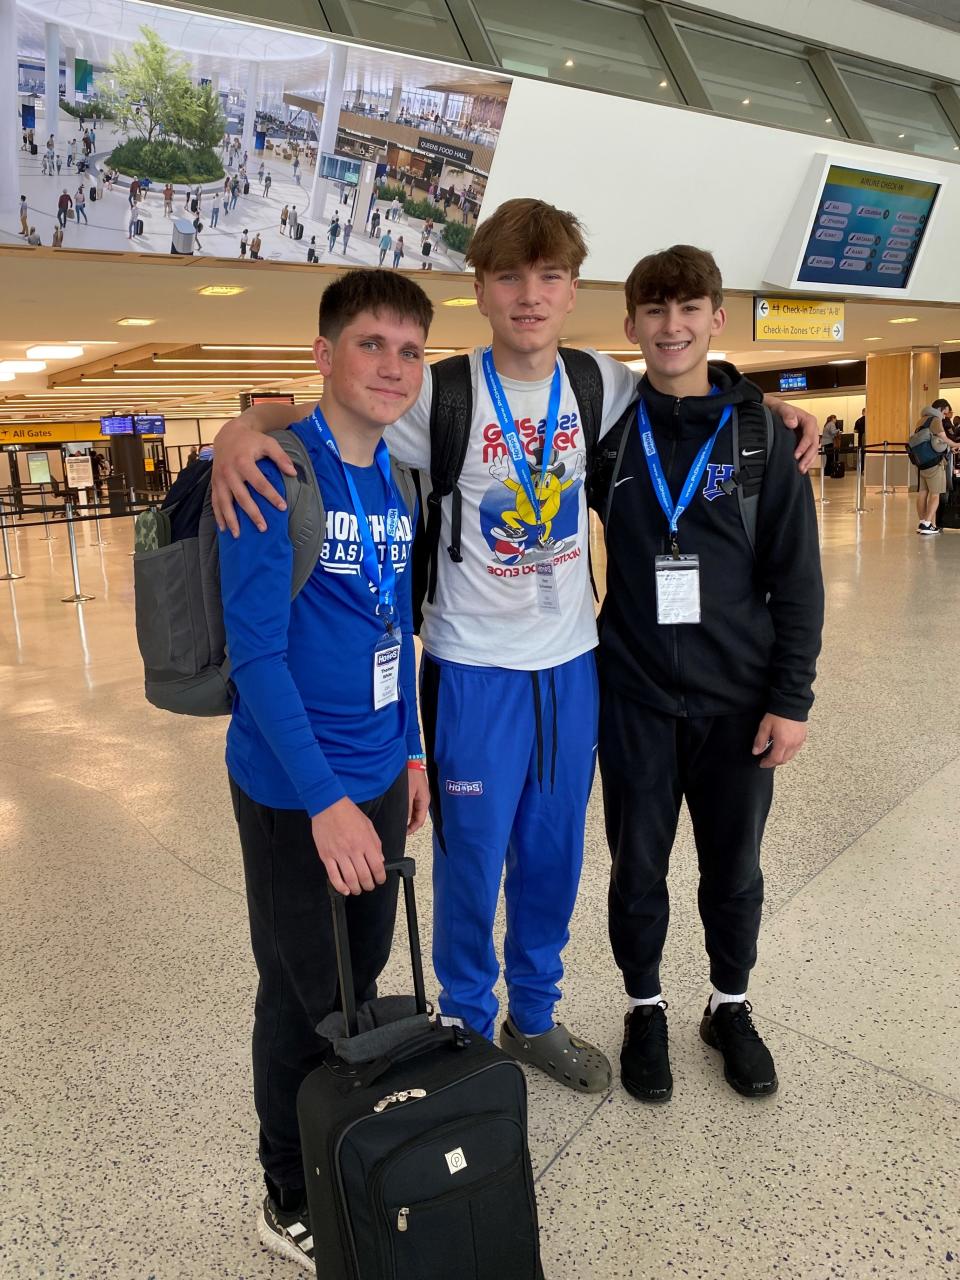 Thomas White, Finn Schweizer and Jack Starbuck helped PhD Hoops USA to a gold medal in the under-16 division at the United World Games in Austria in June of 2023.